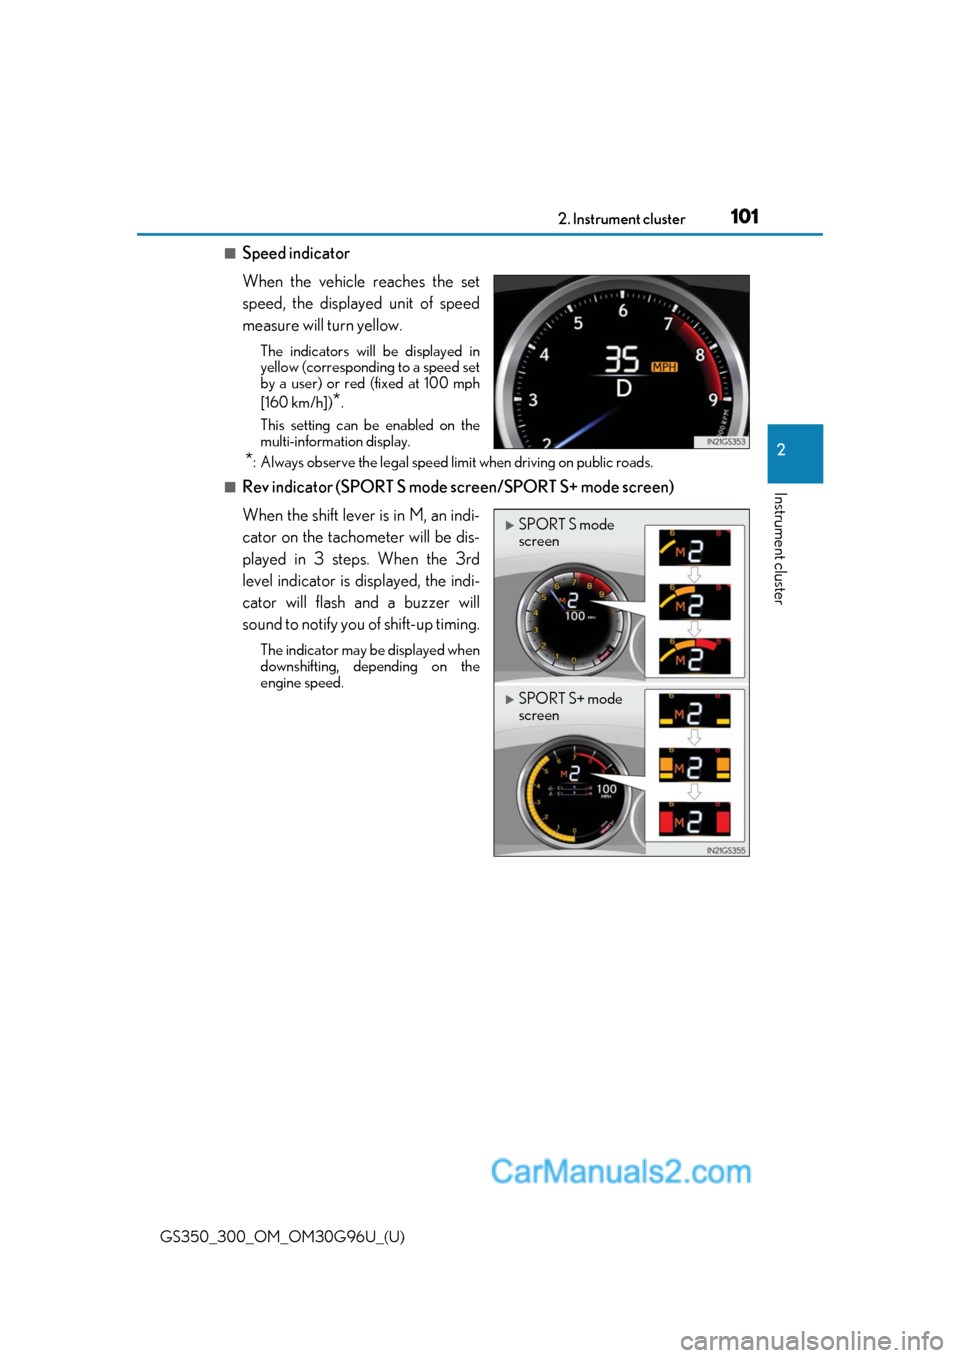 Lexus GS300 2019 Owners Guide GS350_300_OM_OM30G96U_(U)
1012. Instrument cluster
2
Instrument cluster
■Speed indicator
When the vehicle reaches the set
speed, the displayed unit of speed
measure will turn yellow.
The indicators 